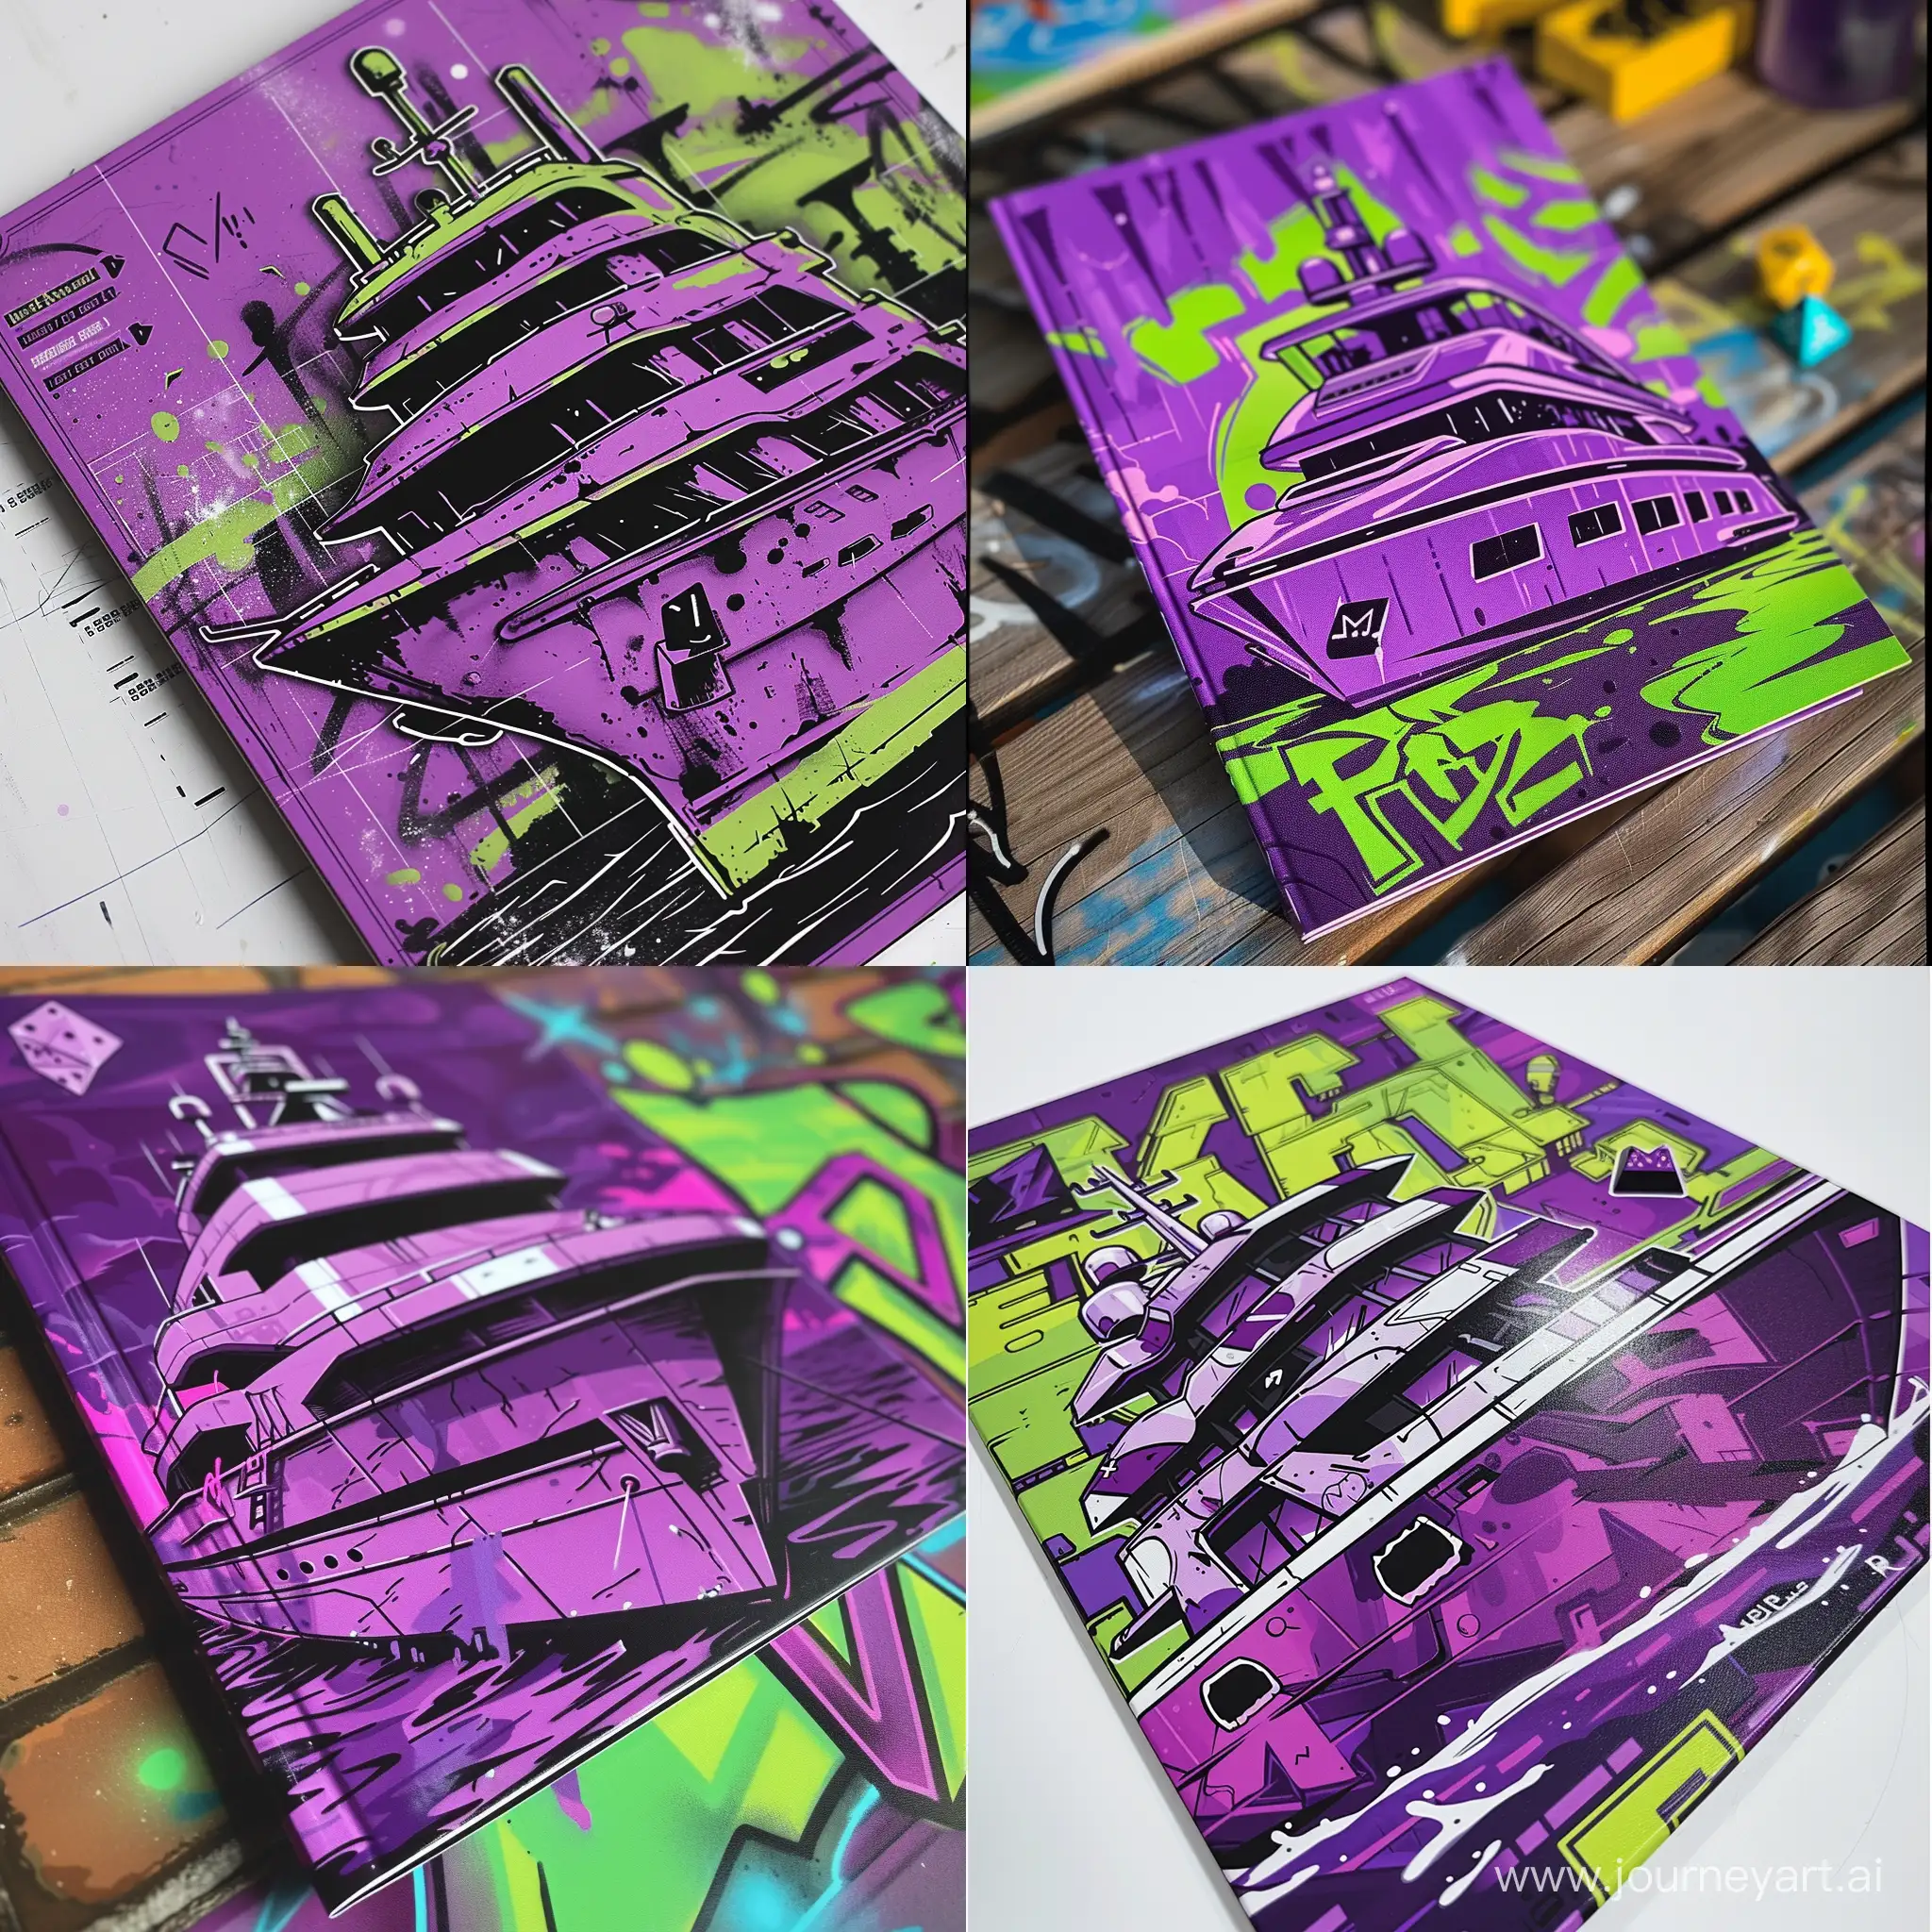 Tabletop-Dice-Game-Rule-Booklet-with-Vibrant-Yacht-Graffiti-Art